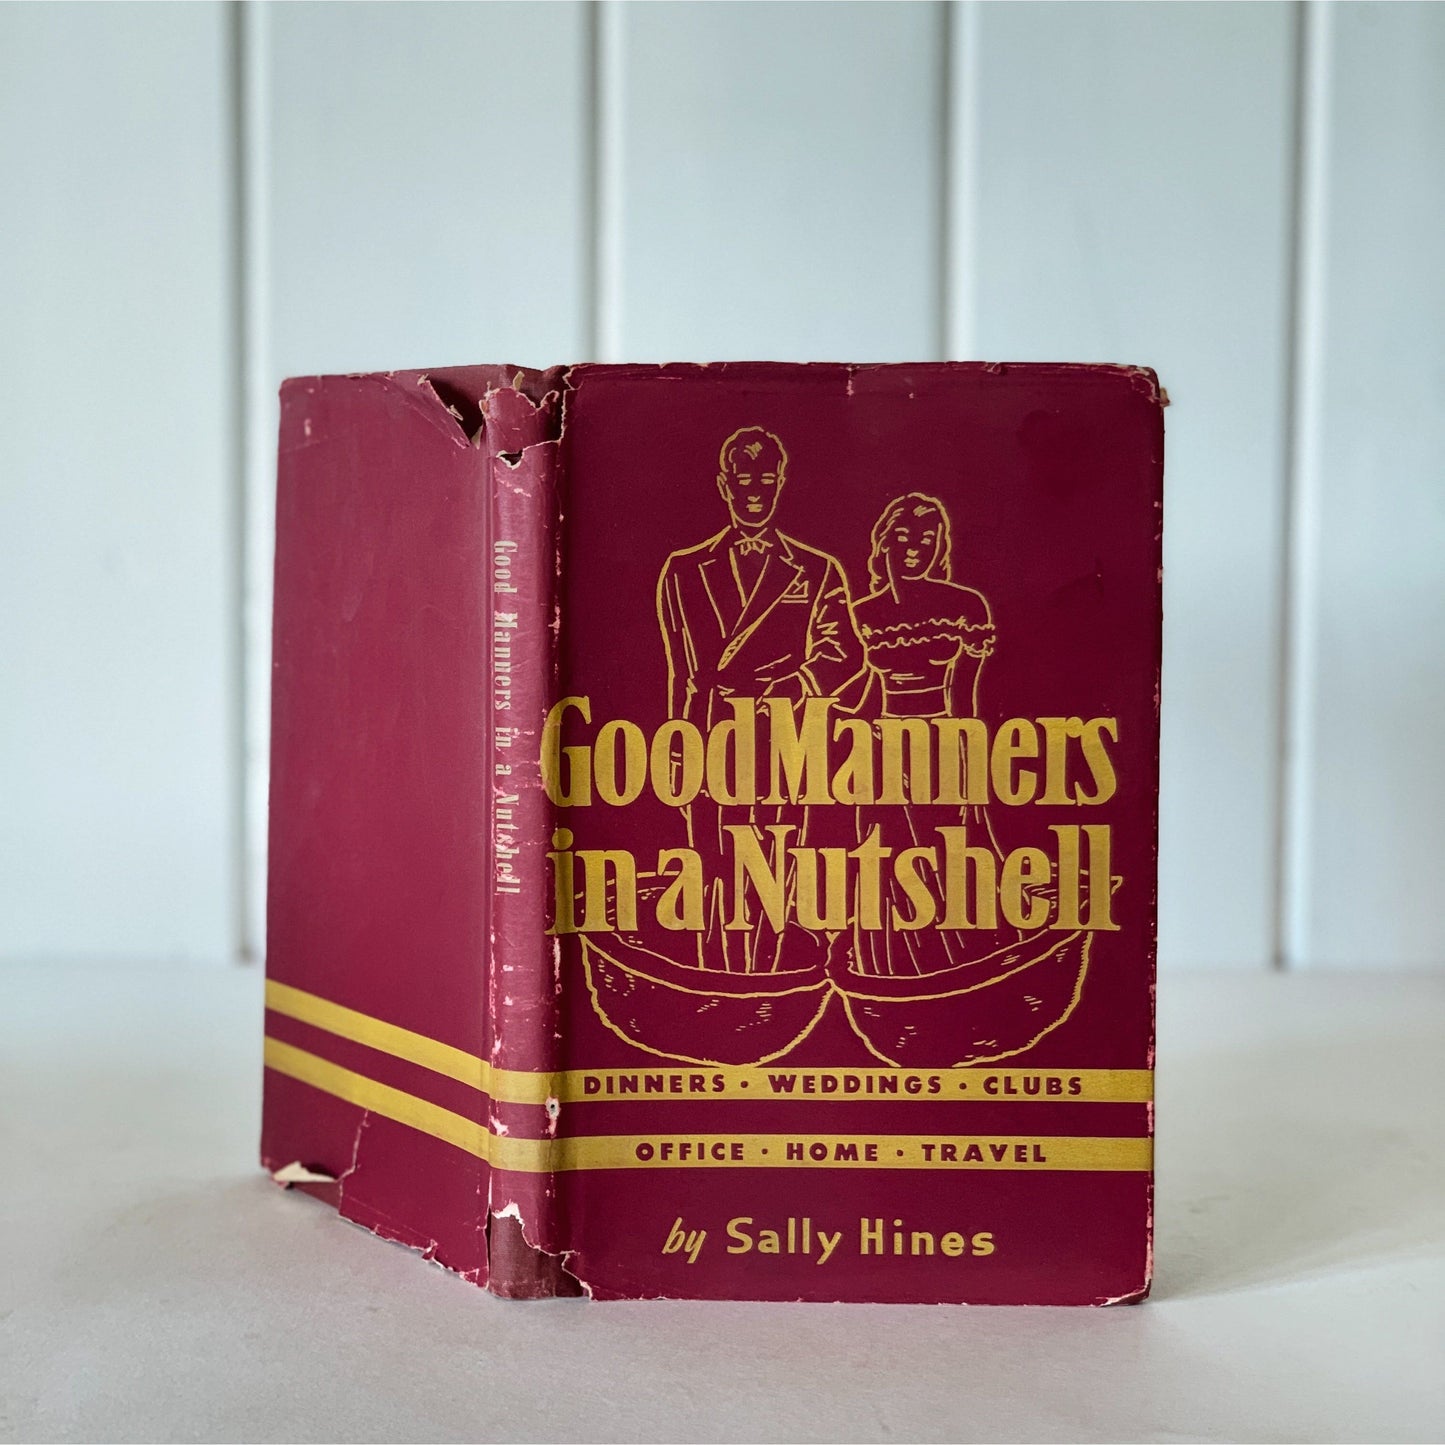 Good Manners in a Nutshell, Sally Hines, 1946 Hardcover Etiquette Book